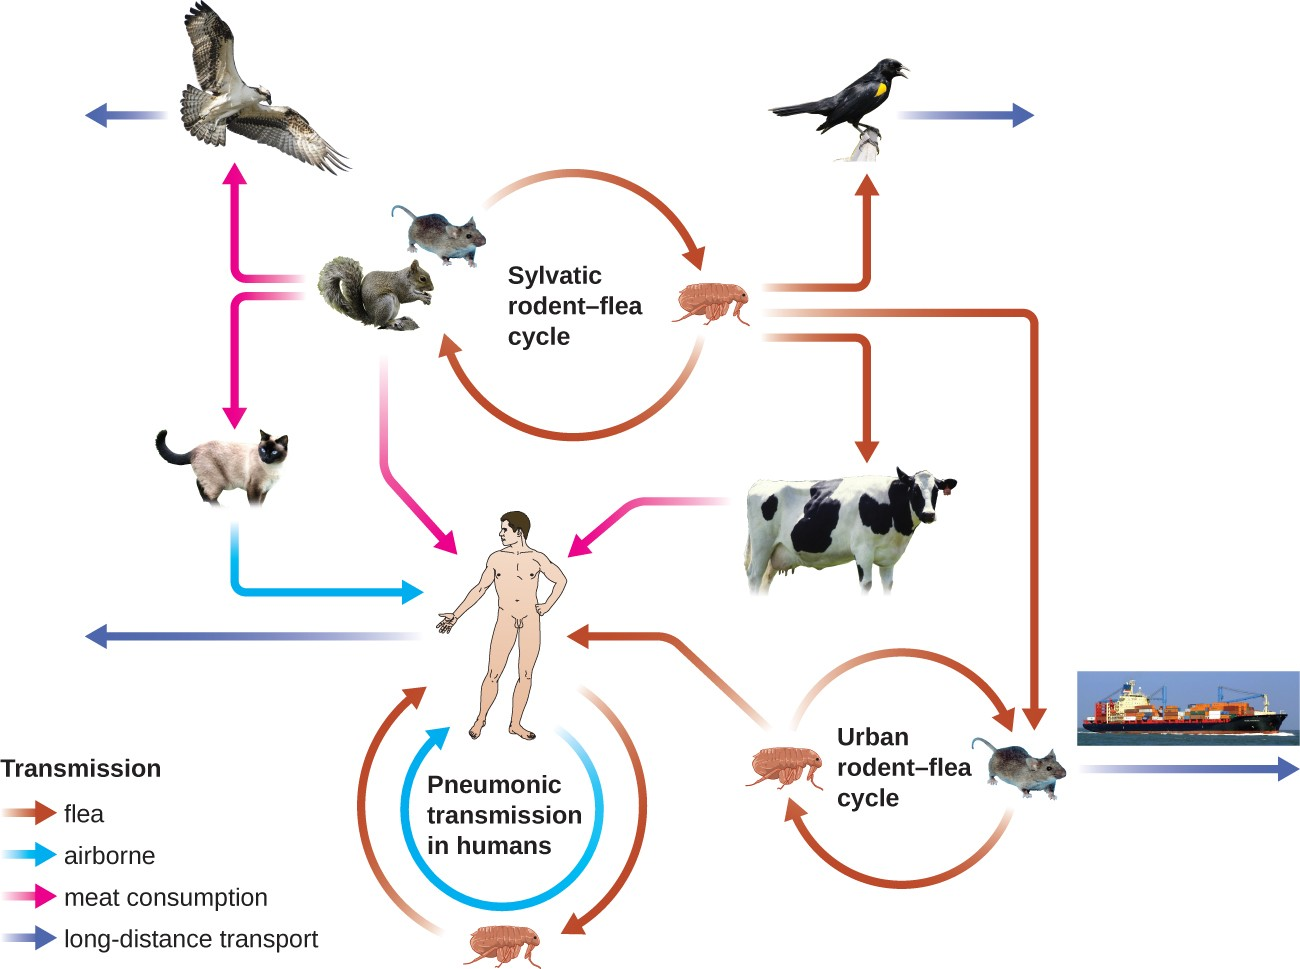 Yersinia pestis, the causative agent of plague, has numerous modes of transmission. The modes are divided into two ecological classes: urban and sylvatic (i.e., forest or rural). The urban cycle primarily involves transmission from infected urban mammals (rats) to humans by flea vectors (brown arrows). The disease may travel between urban centers (purple arrow) if infected rats find their way onto ships or trains. The sylvatic cycle involves mammals more common in nonurban environments. Sylvatic birds and mammals (including humans) may become infected after eating infected mammals (pink arrows) or by flea vectors. Pneumonic transmission occurs between humans or between humans and infected animals through the inhalation of Y. pestis in aerosols.